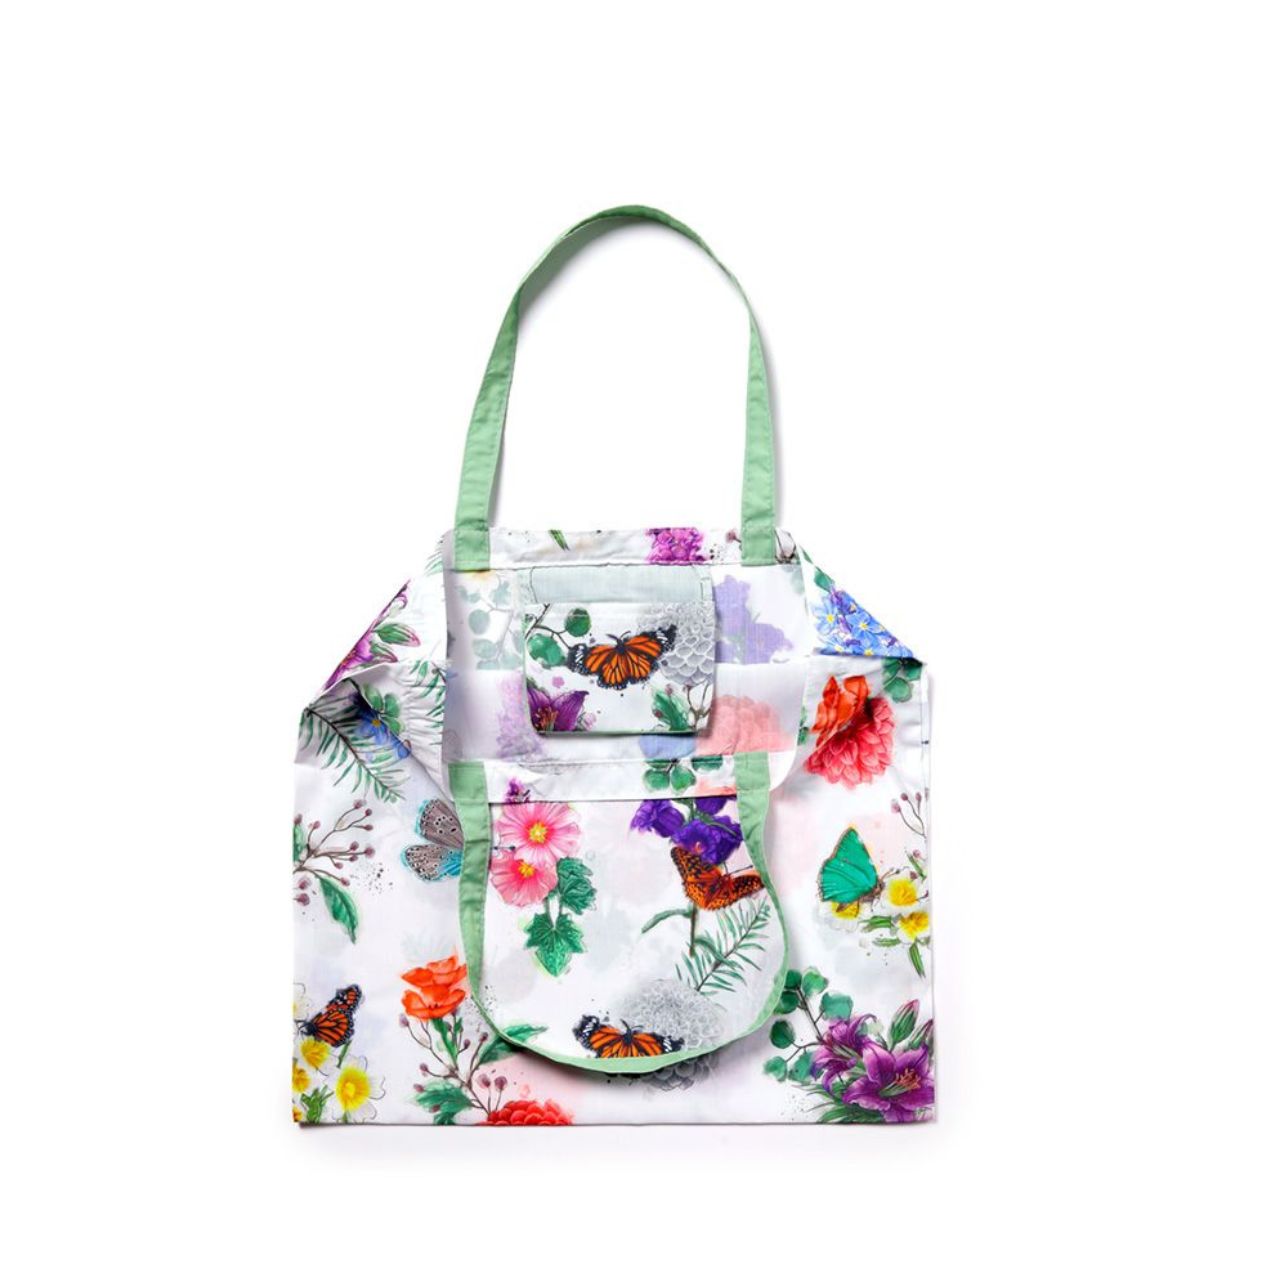 Introducing our Foldable Reusable Shopping Bag, designed with convenience and sustainability in mind. Made with RPET material, it easily folds into a compact size for easy storage and portability. Say goodbye to single-use plastic bags and hello to our Butterfly Meadows print, bringing a touch of nature to your shopping routine.